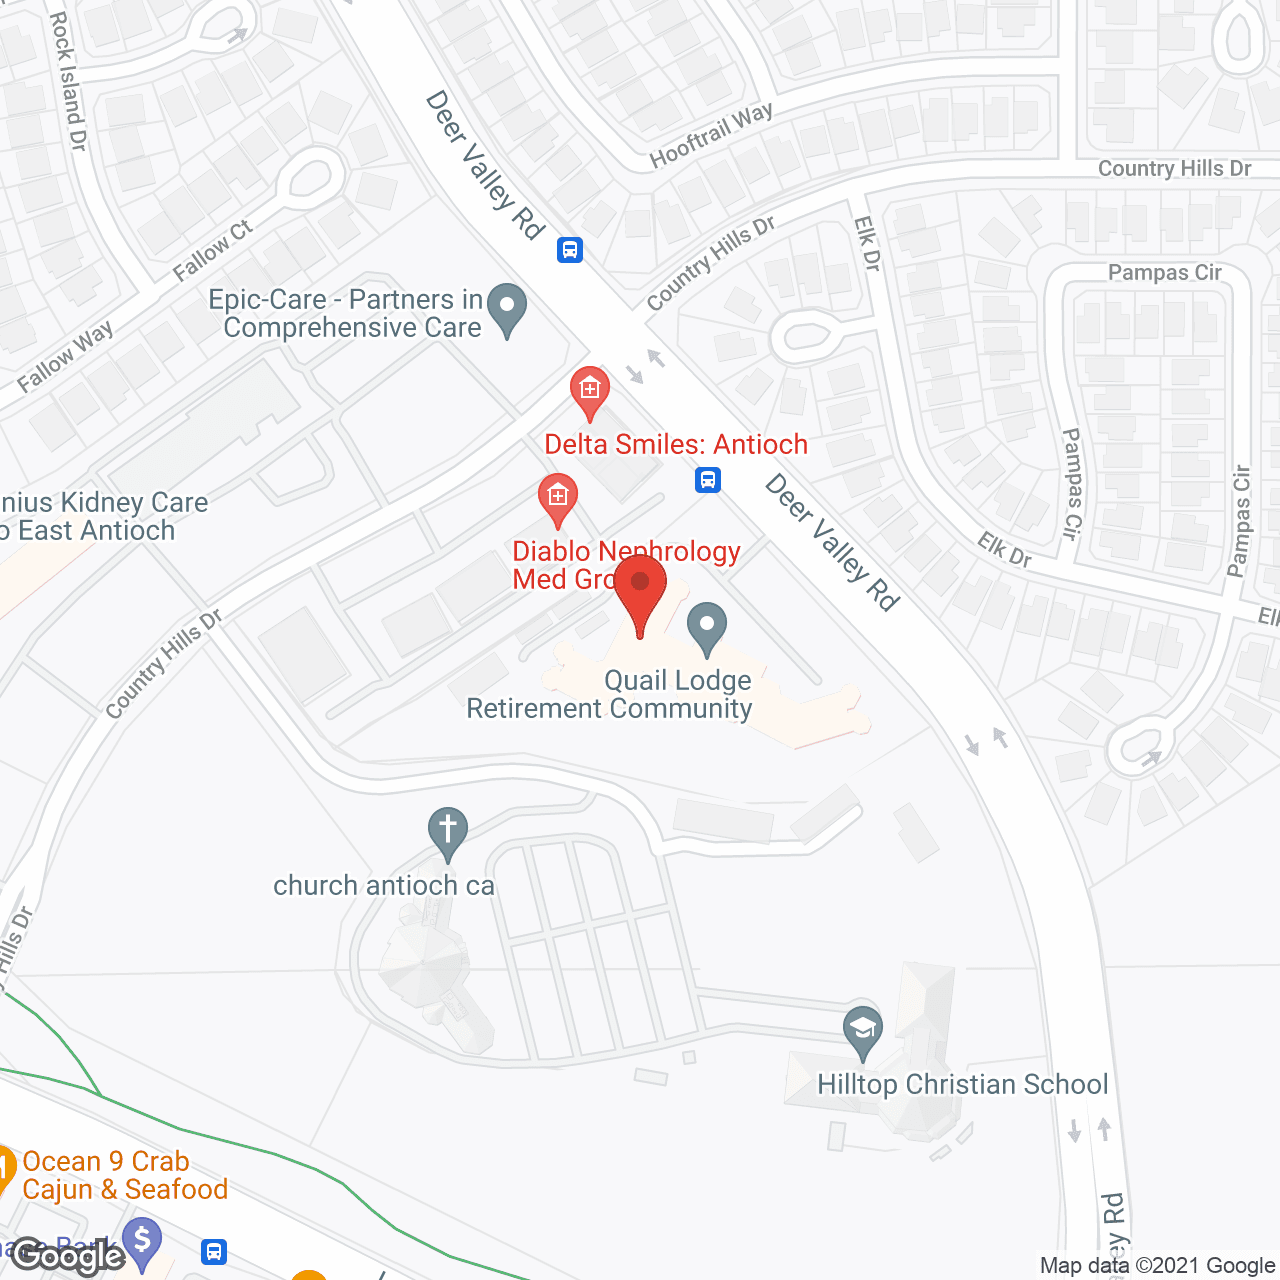 At Home Care & Companion Services in google map